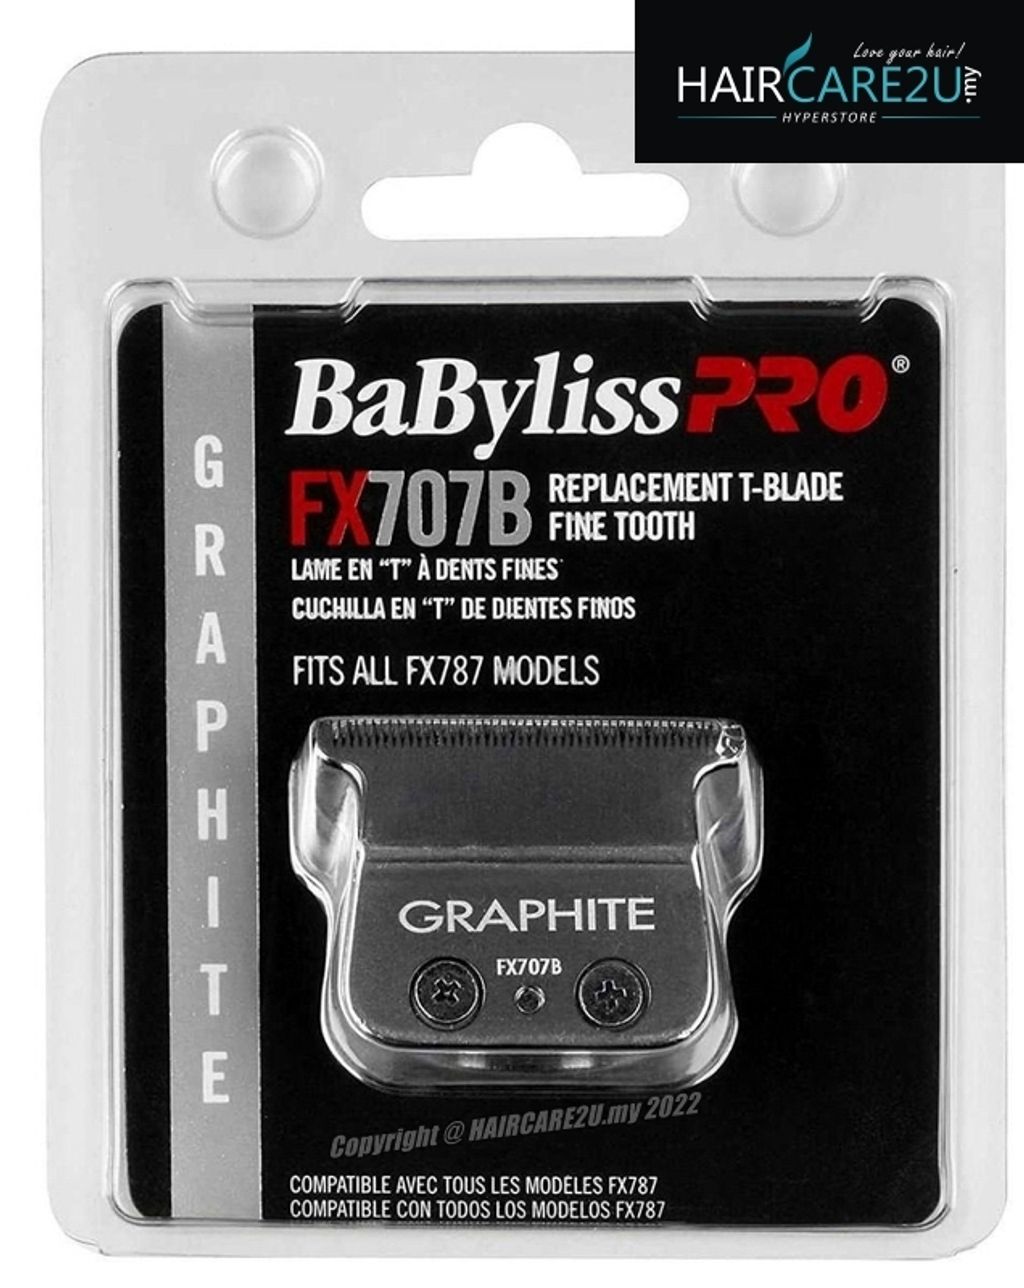 BaByliss Pro Graphite Fine Tooth Replacement T-Blade #FX707B.jpg